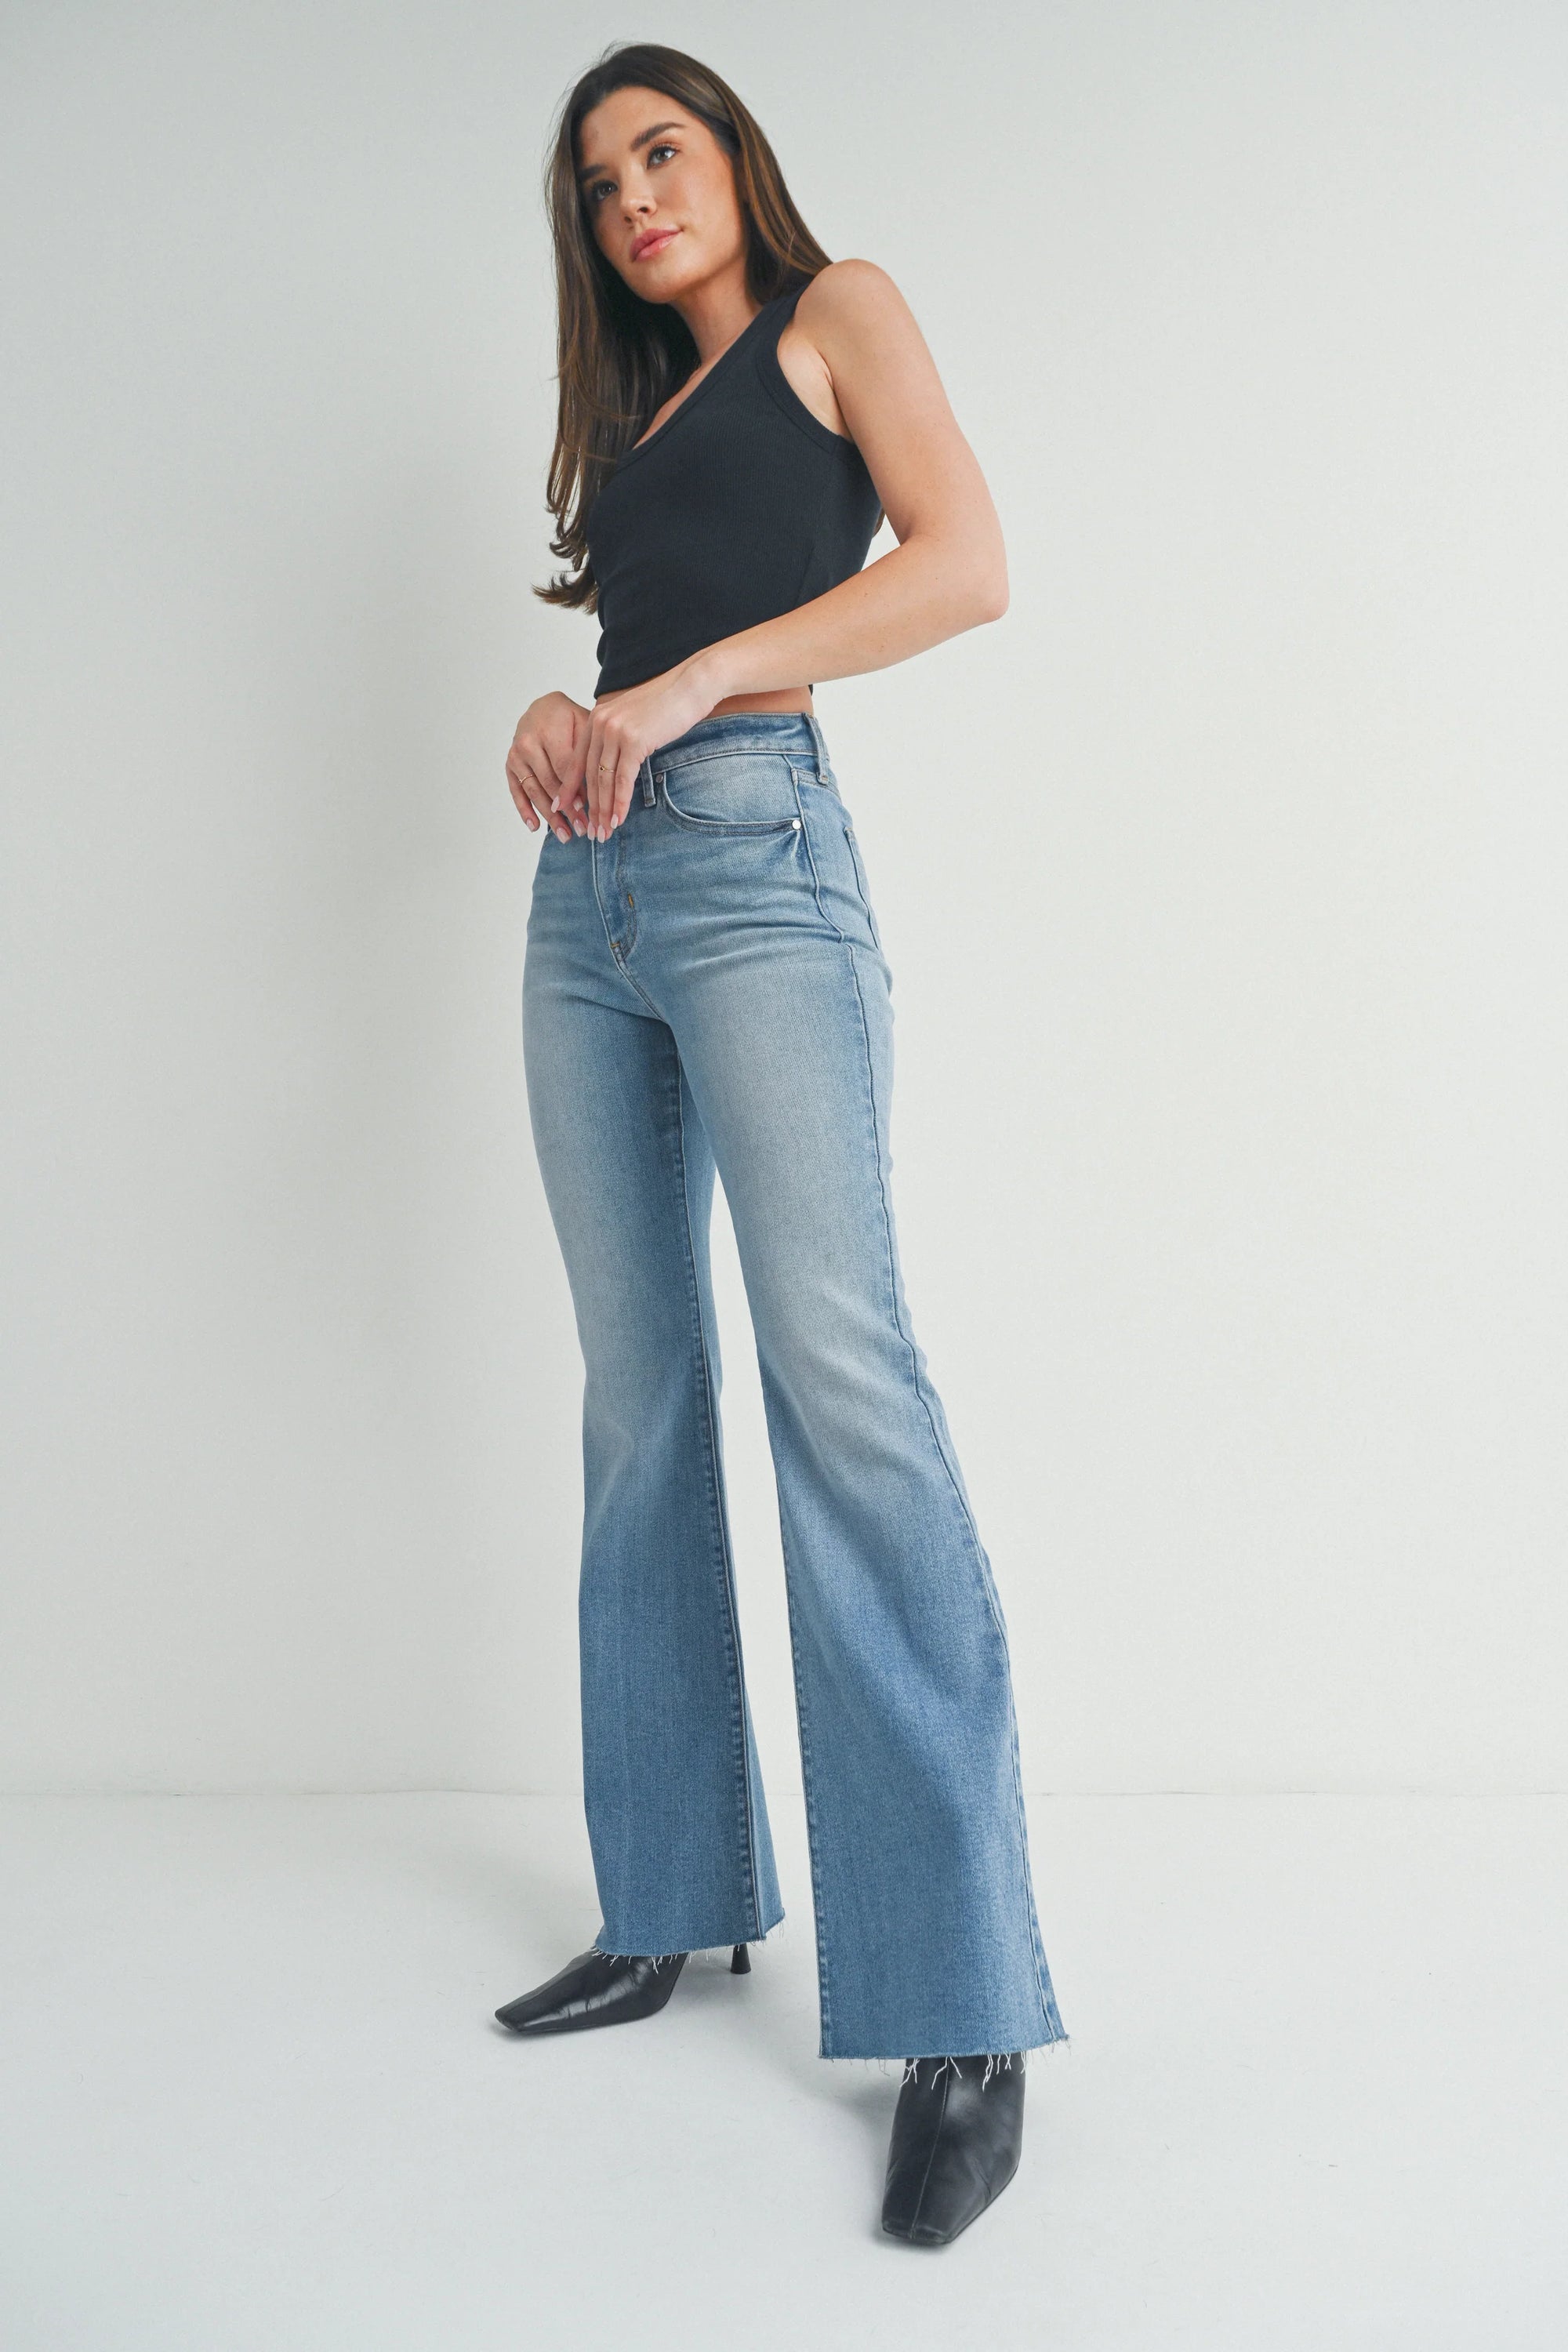 The Mia Straight Bootcut Jeans by Just Black Denim